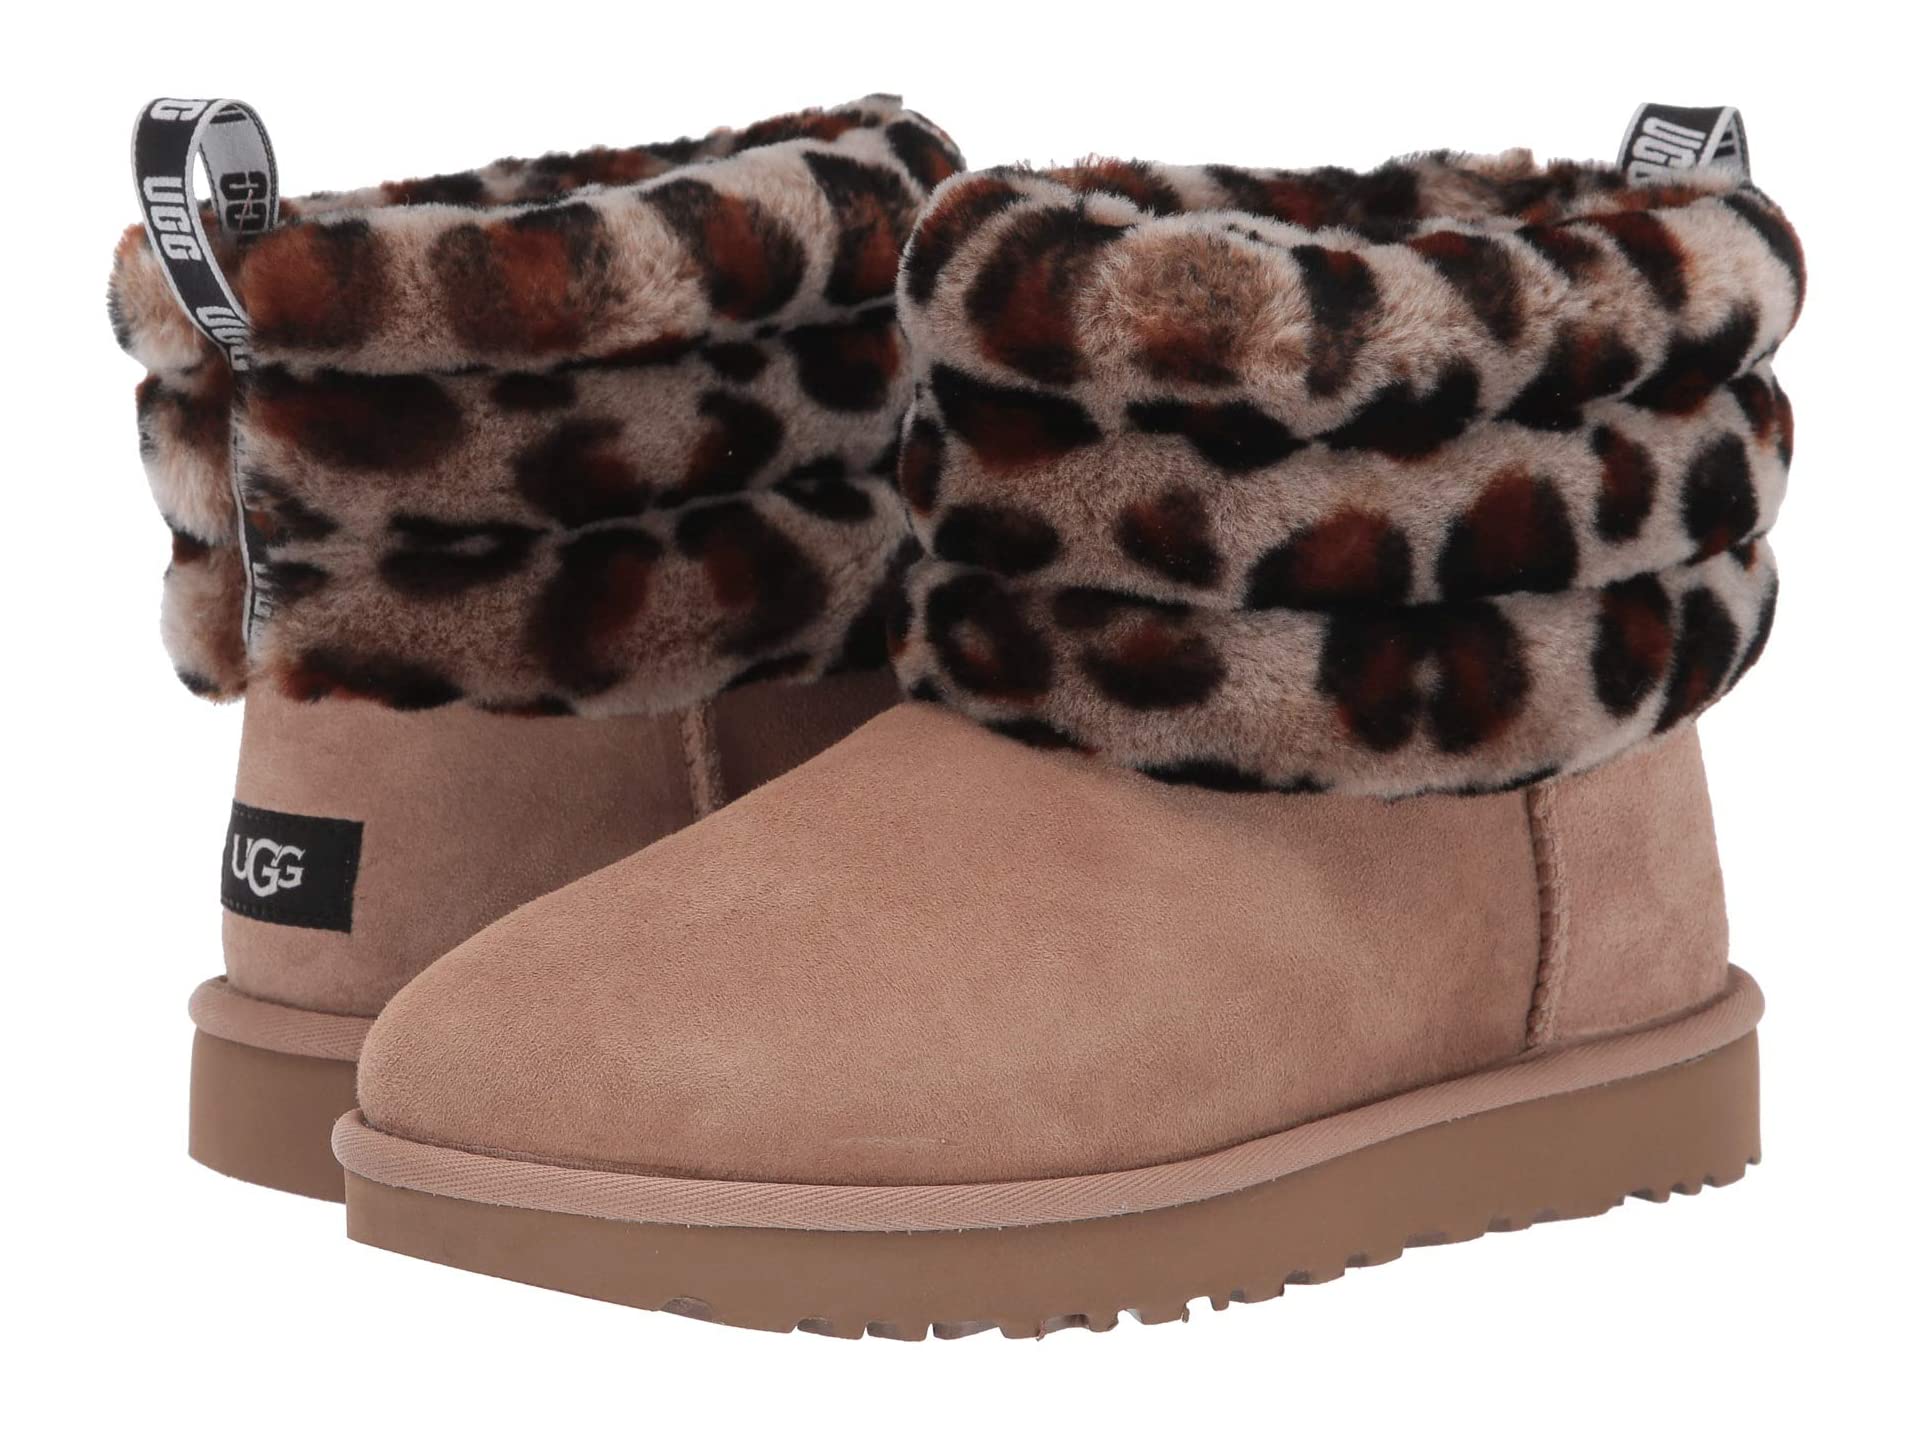 Beyond Complex Reis Where To Shop Ugg On Sale For Cyber Monday- Boots